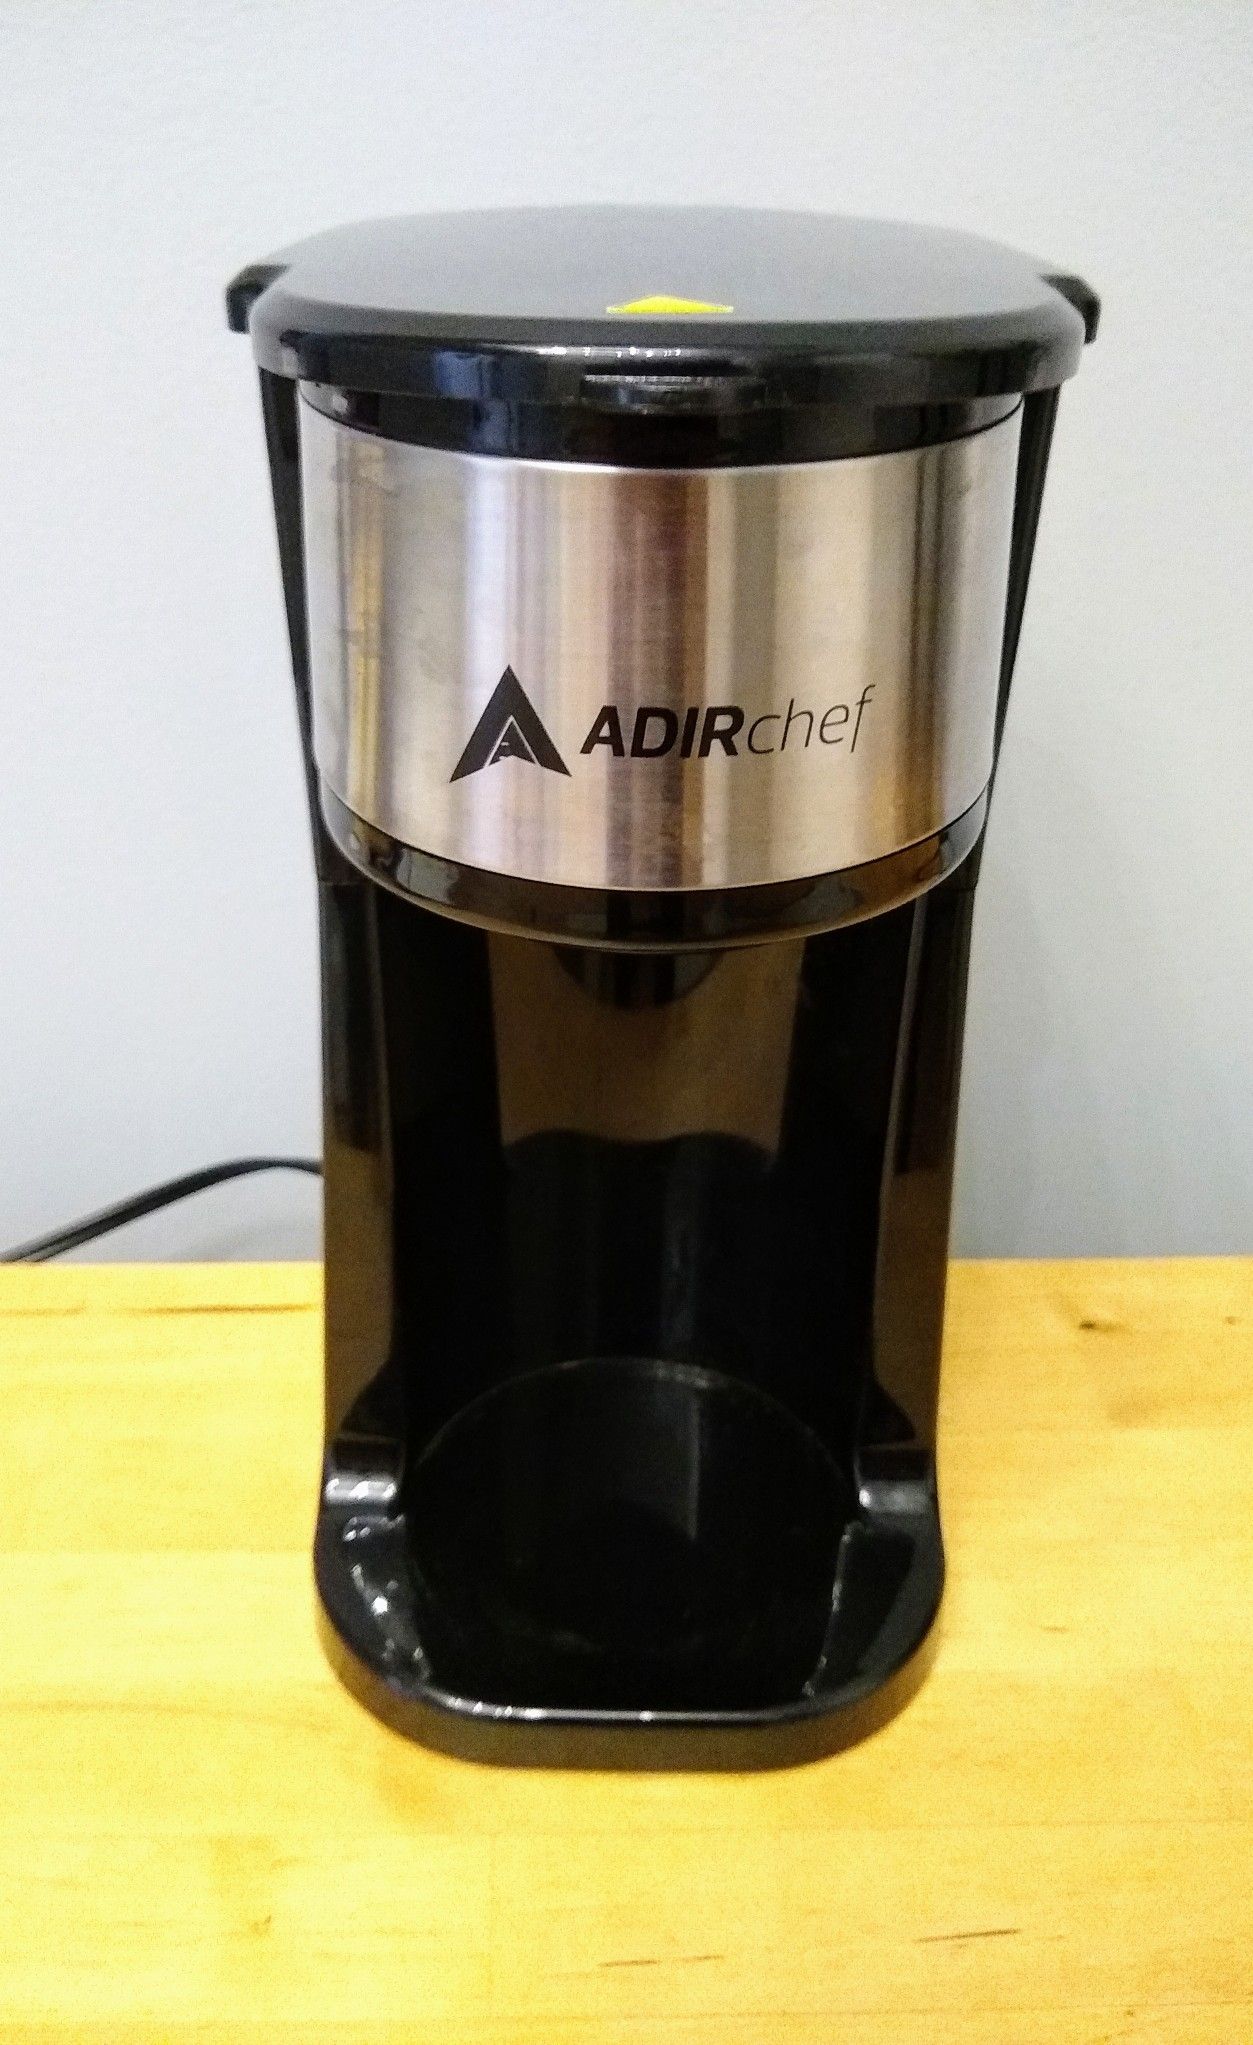 Personal electric one cup coffee maker with reusable filter